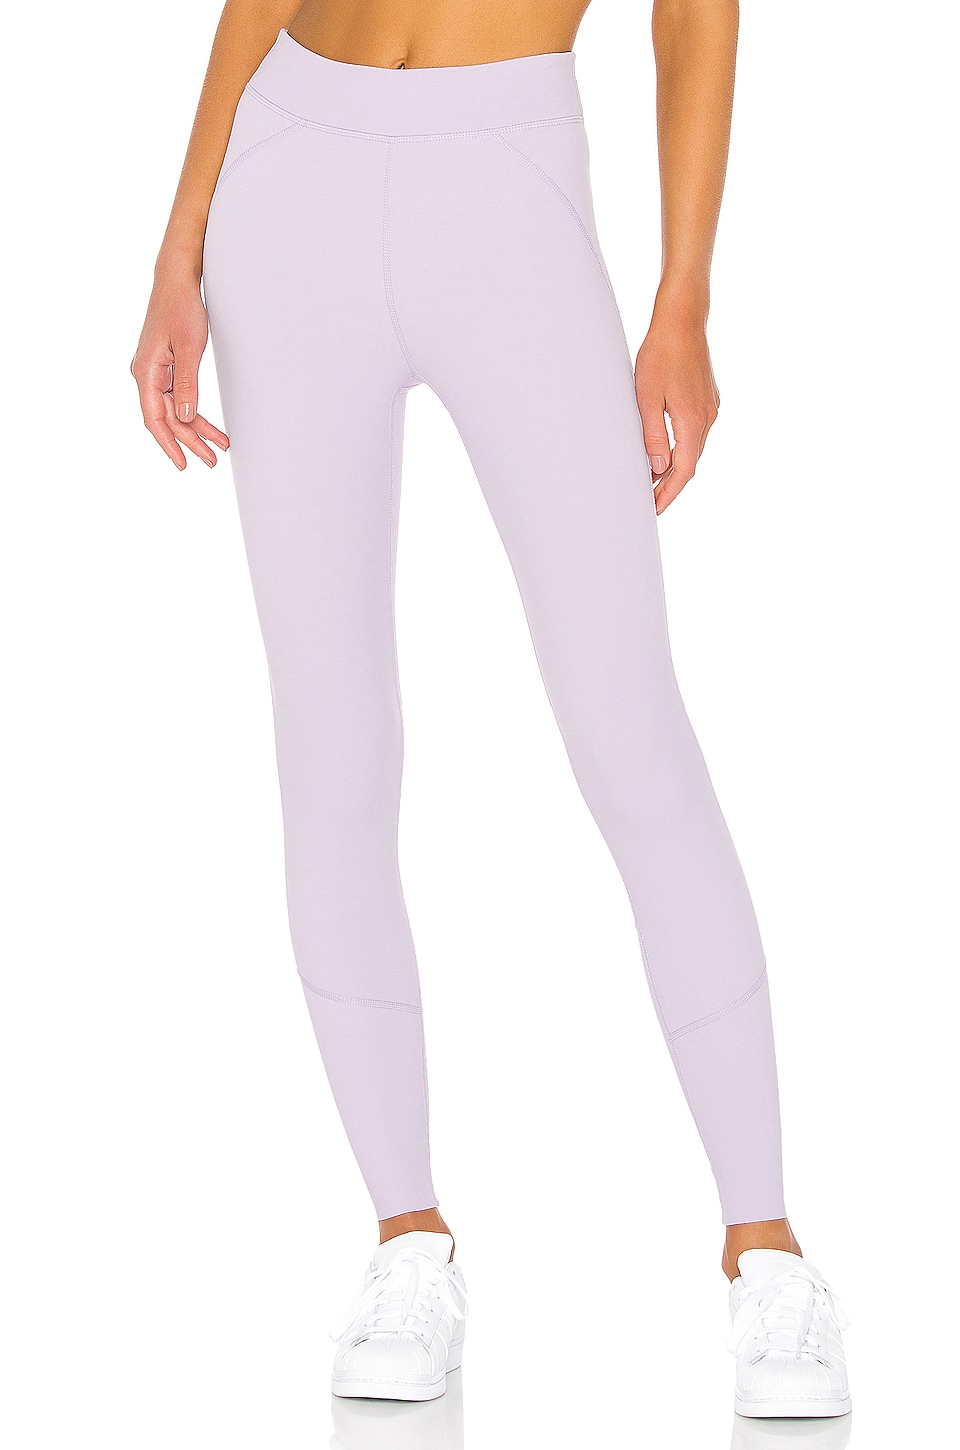 Free People X FP Movement Over The Moon Legging in Lilac | REVOLVE